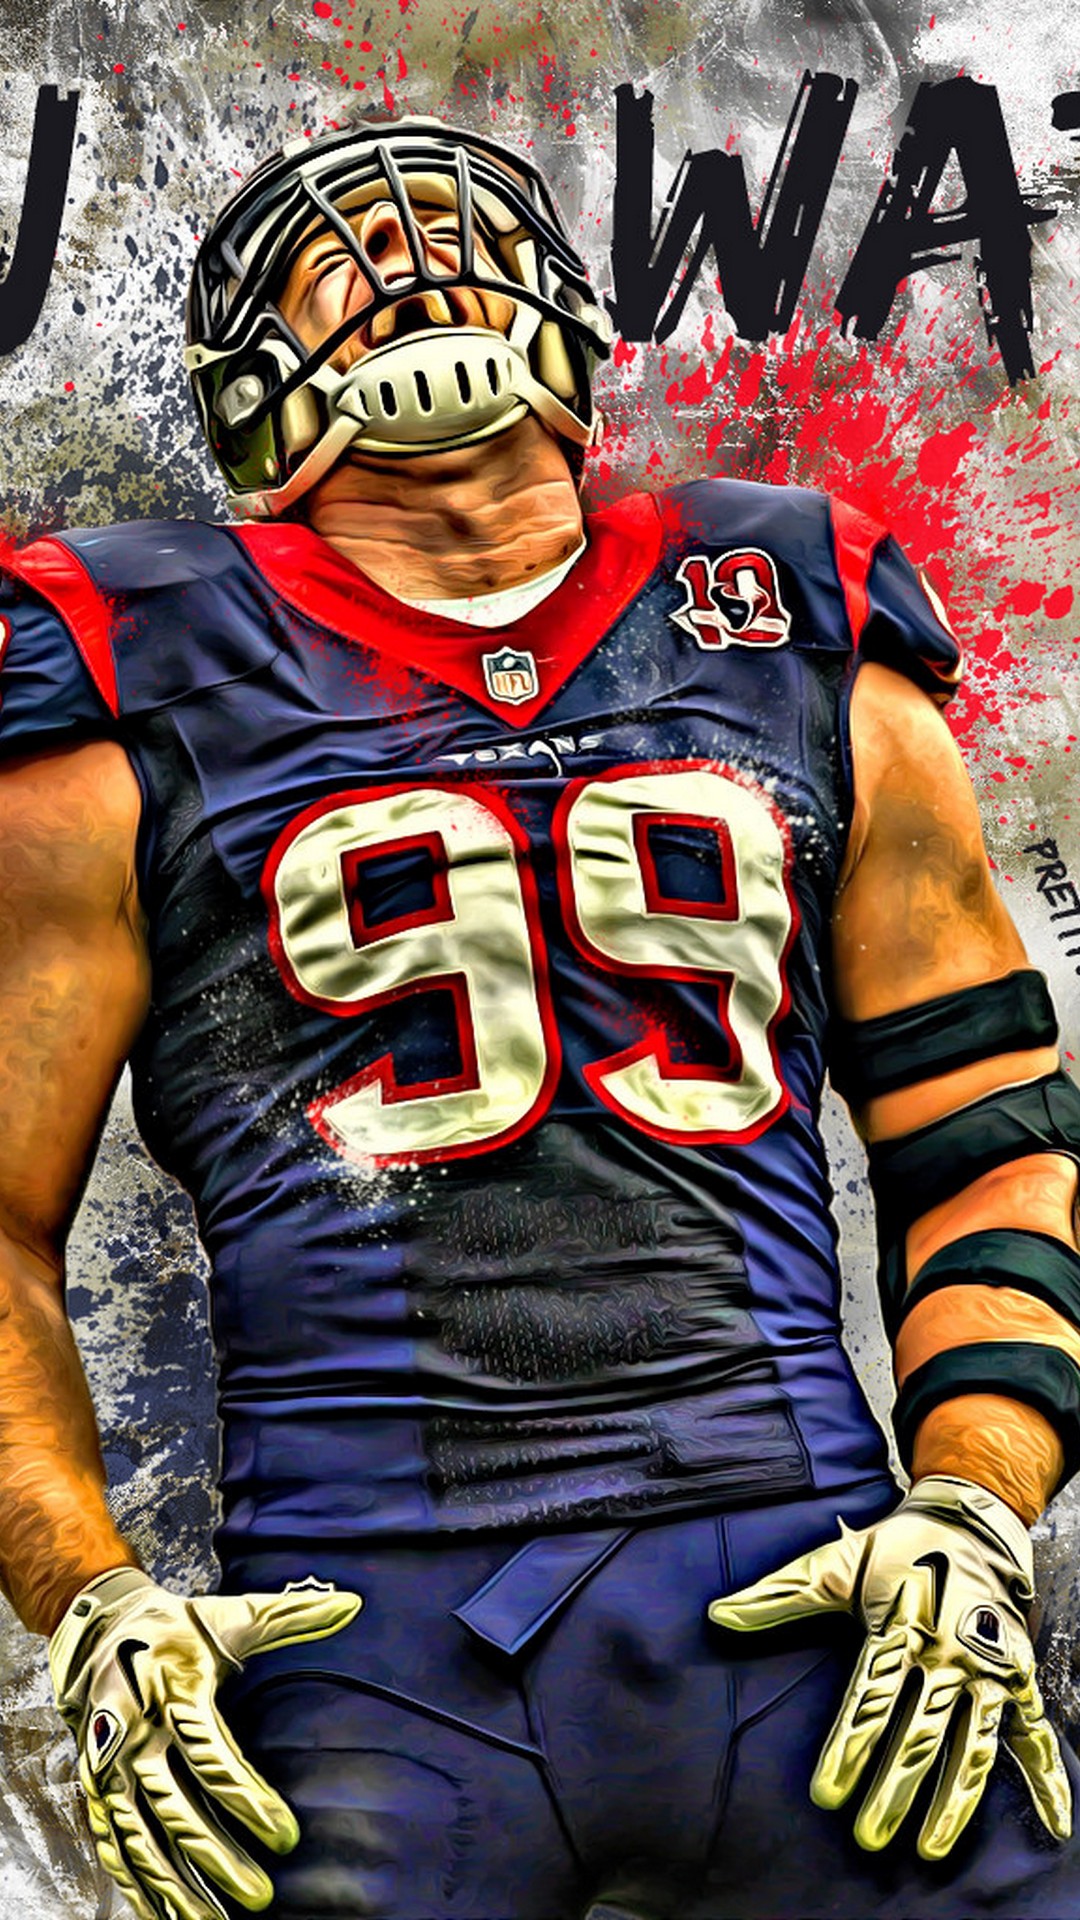 JJ Watt iPhone Wallpaper Home Screen with high-resolution 1080x1920 pixel. Download and set as wallpaper for Apple iPhone X, XS Max, XR, 8, 7, 6, SE, iPad, Android